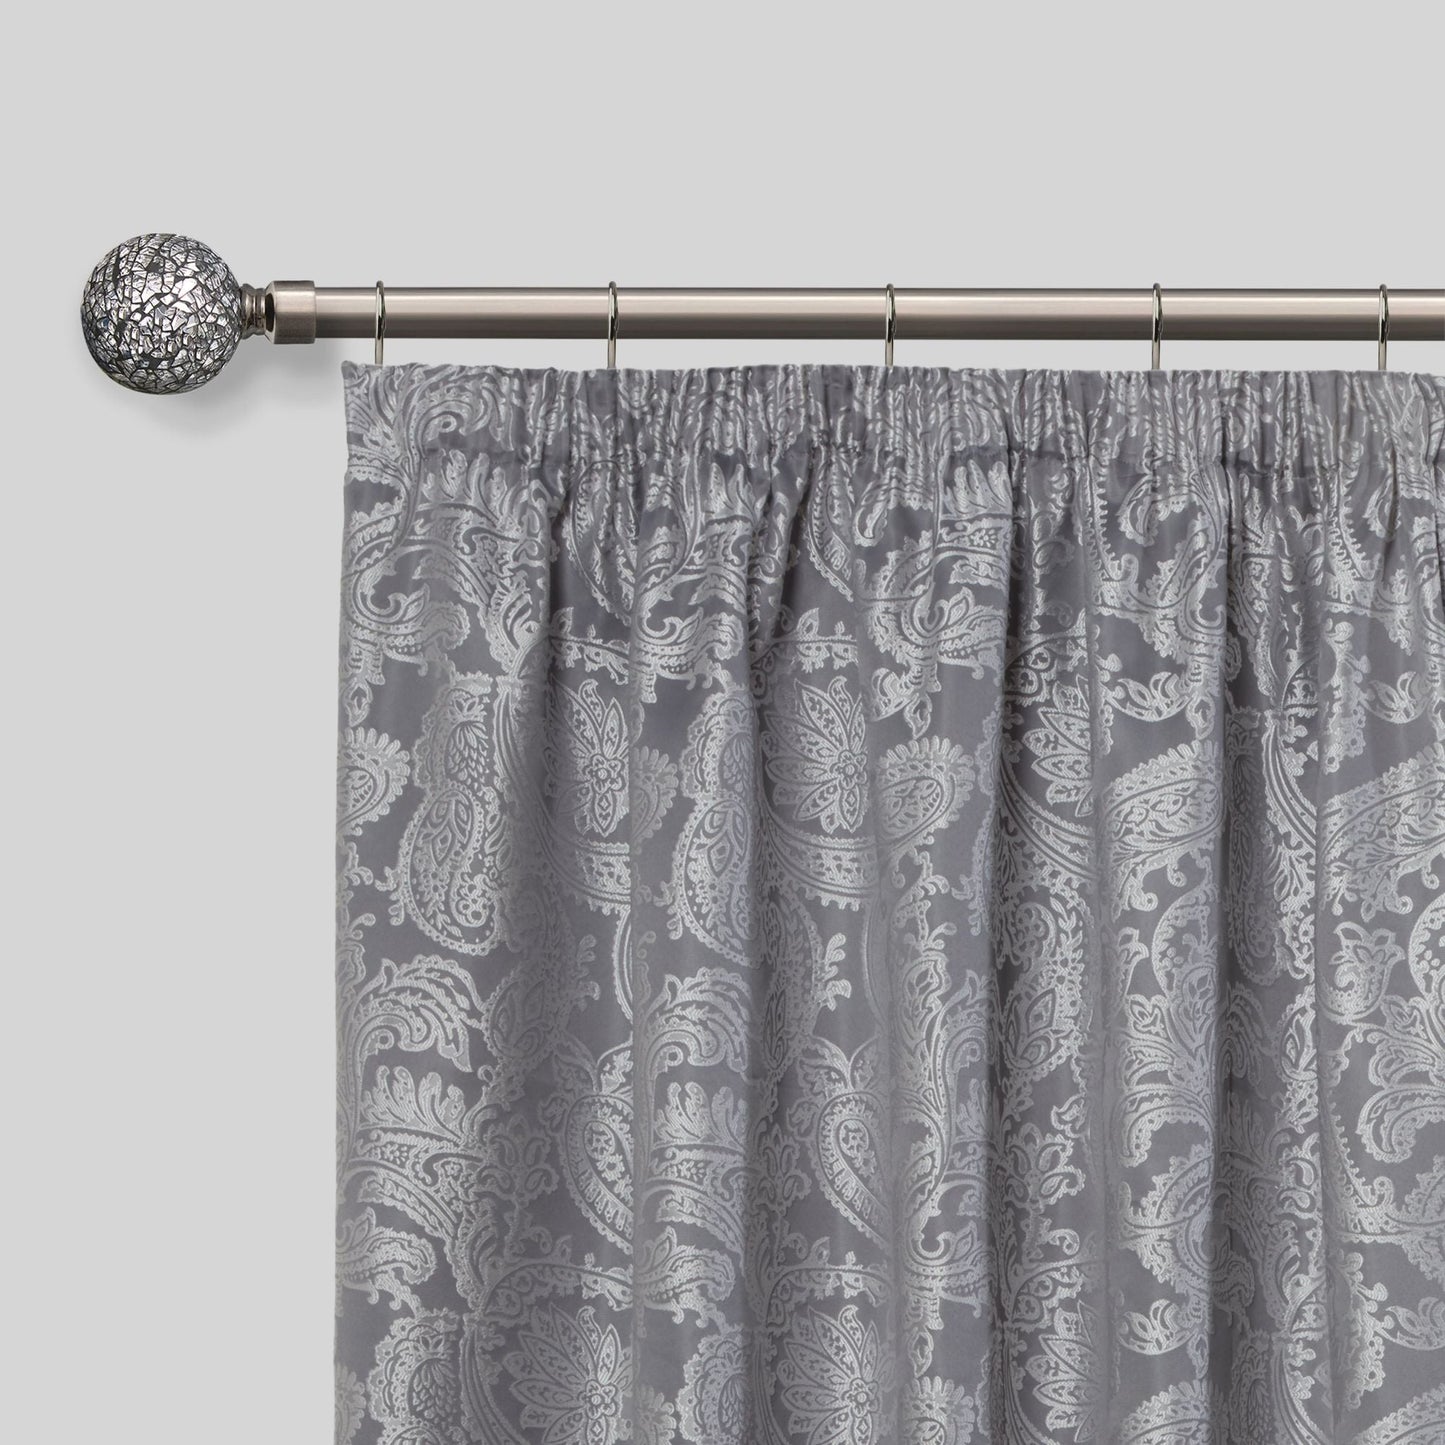 Black Silk Cut Glass Extendable Curtain Pole with Rings